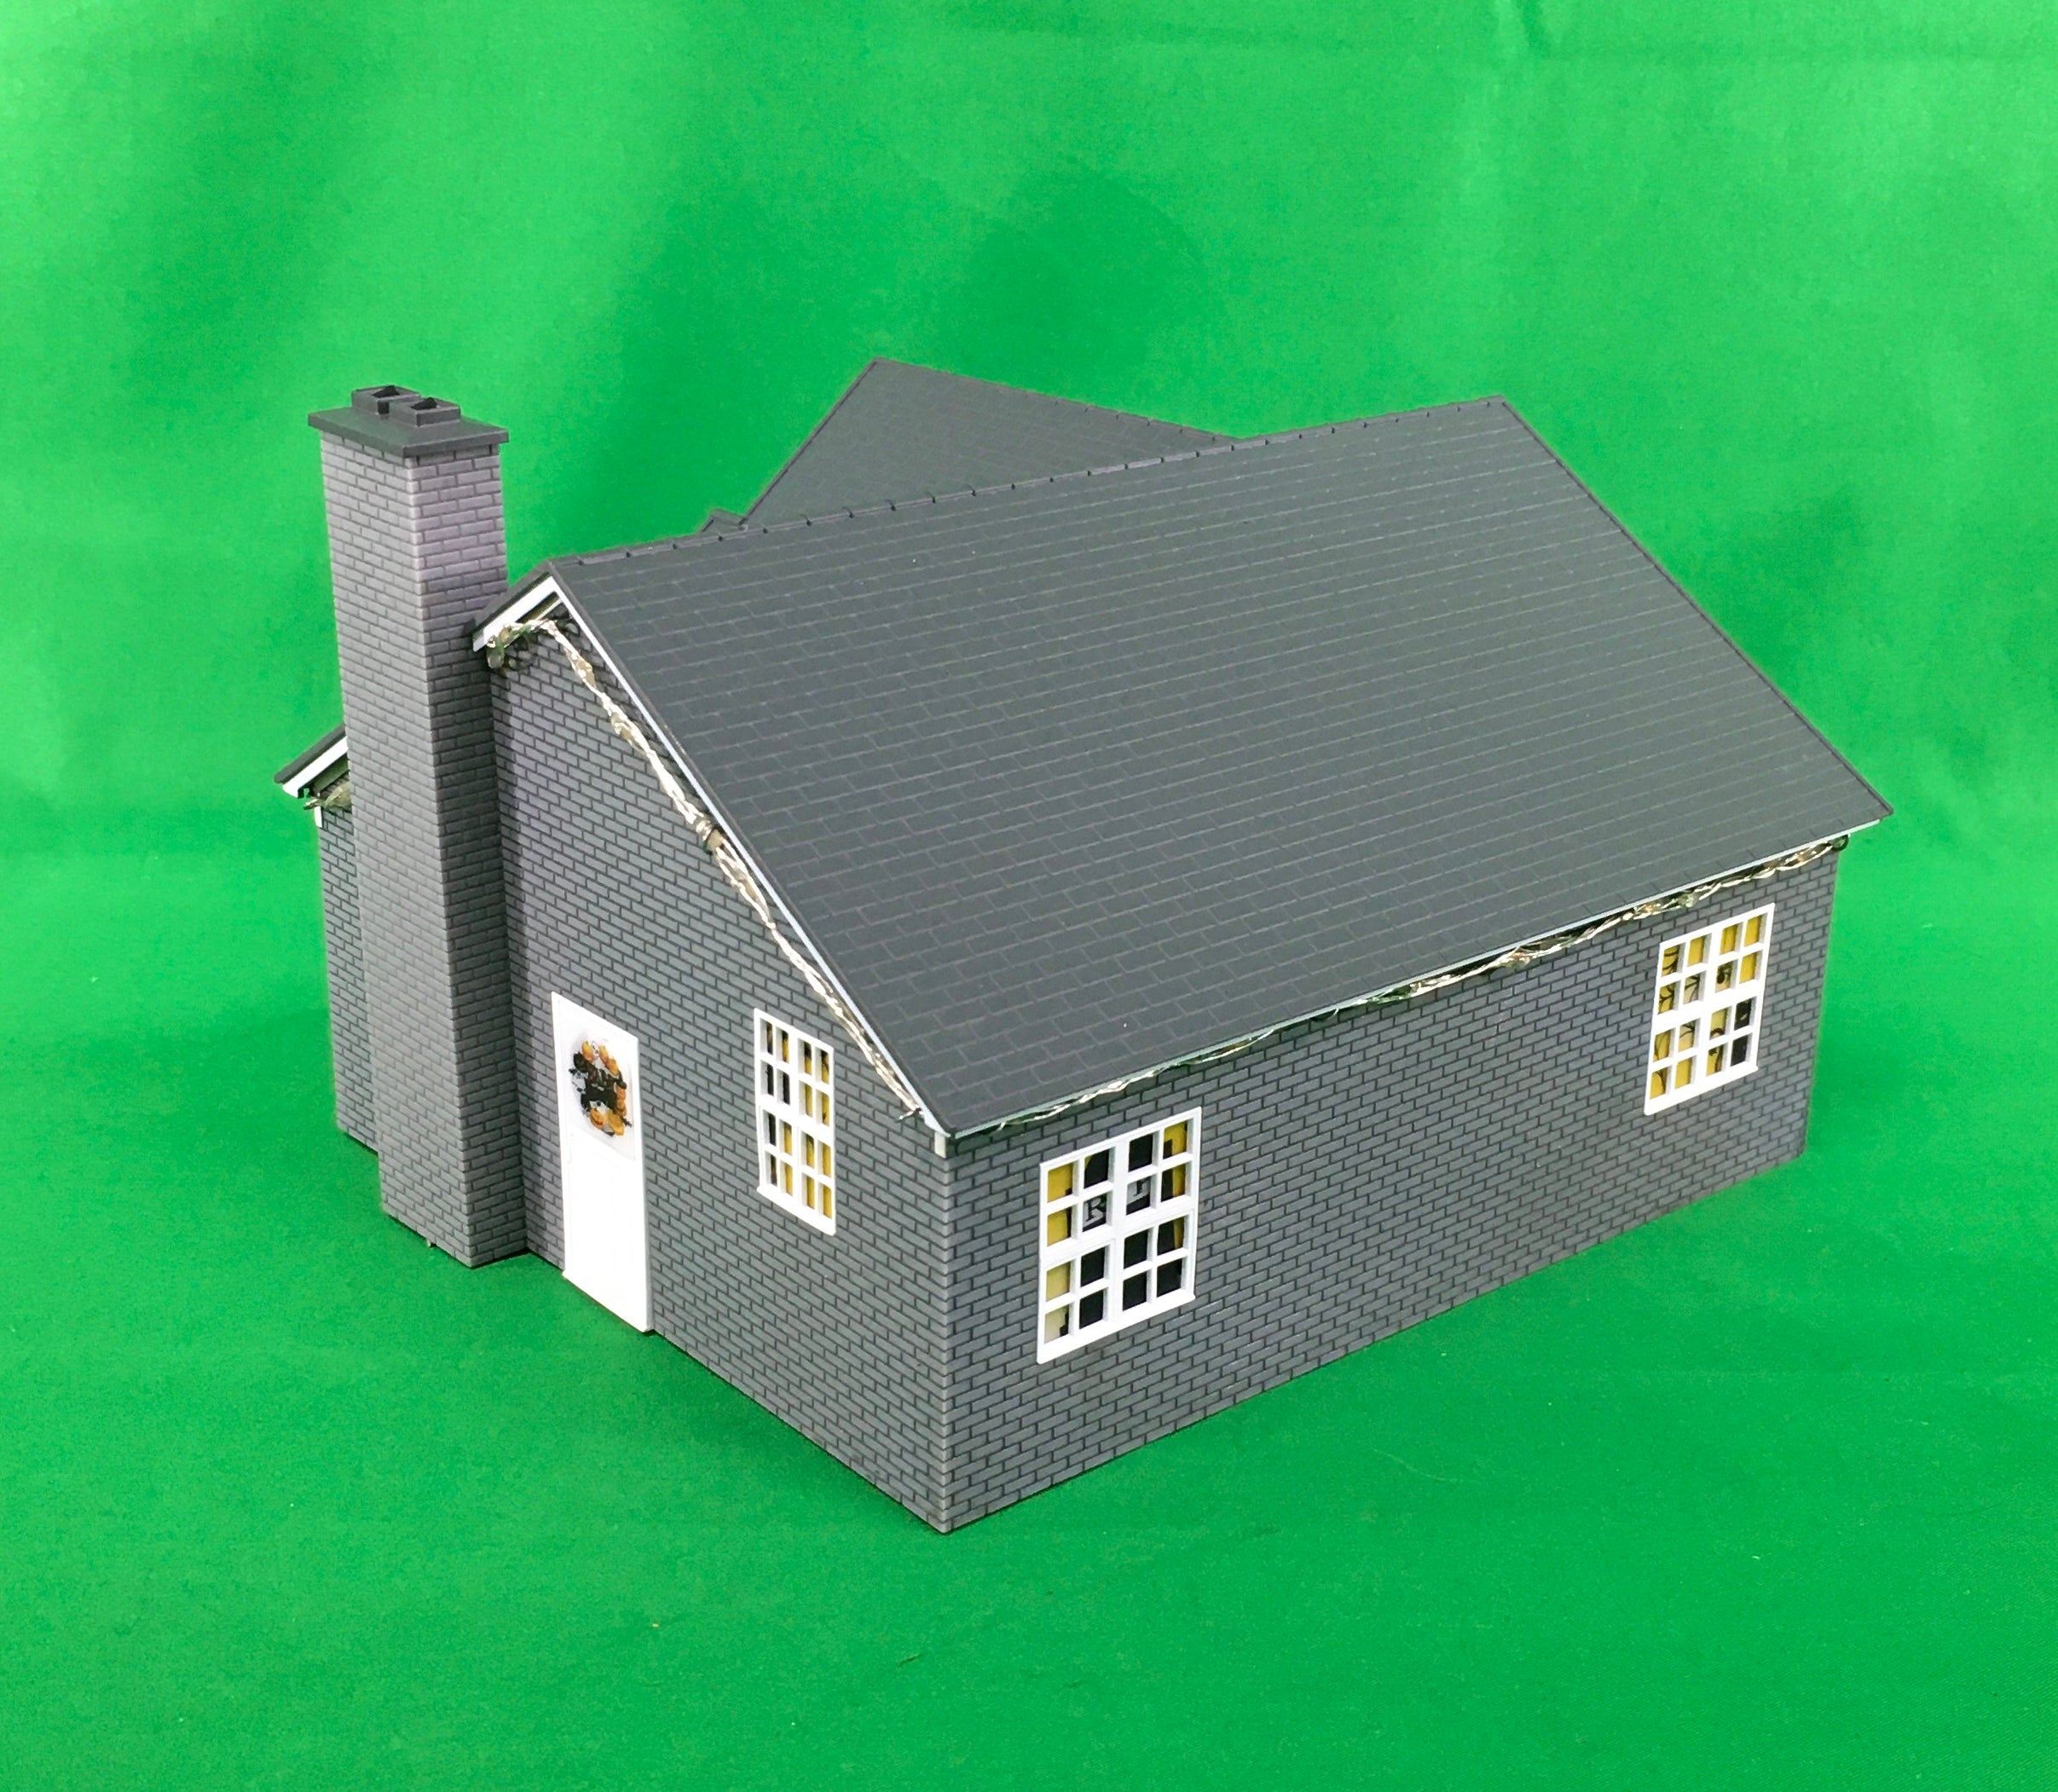 Lionel 1929110 - Plug-Expand-Play "Halloween" House